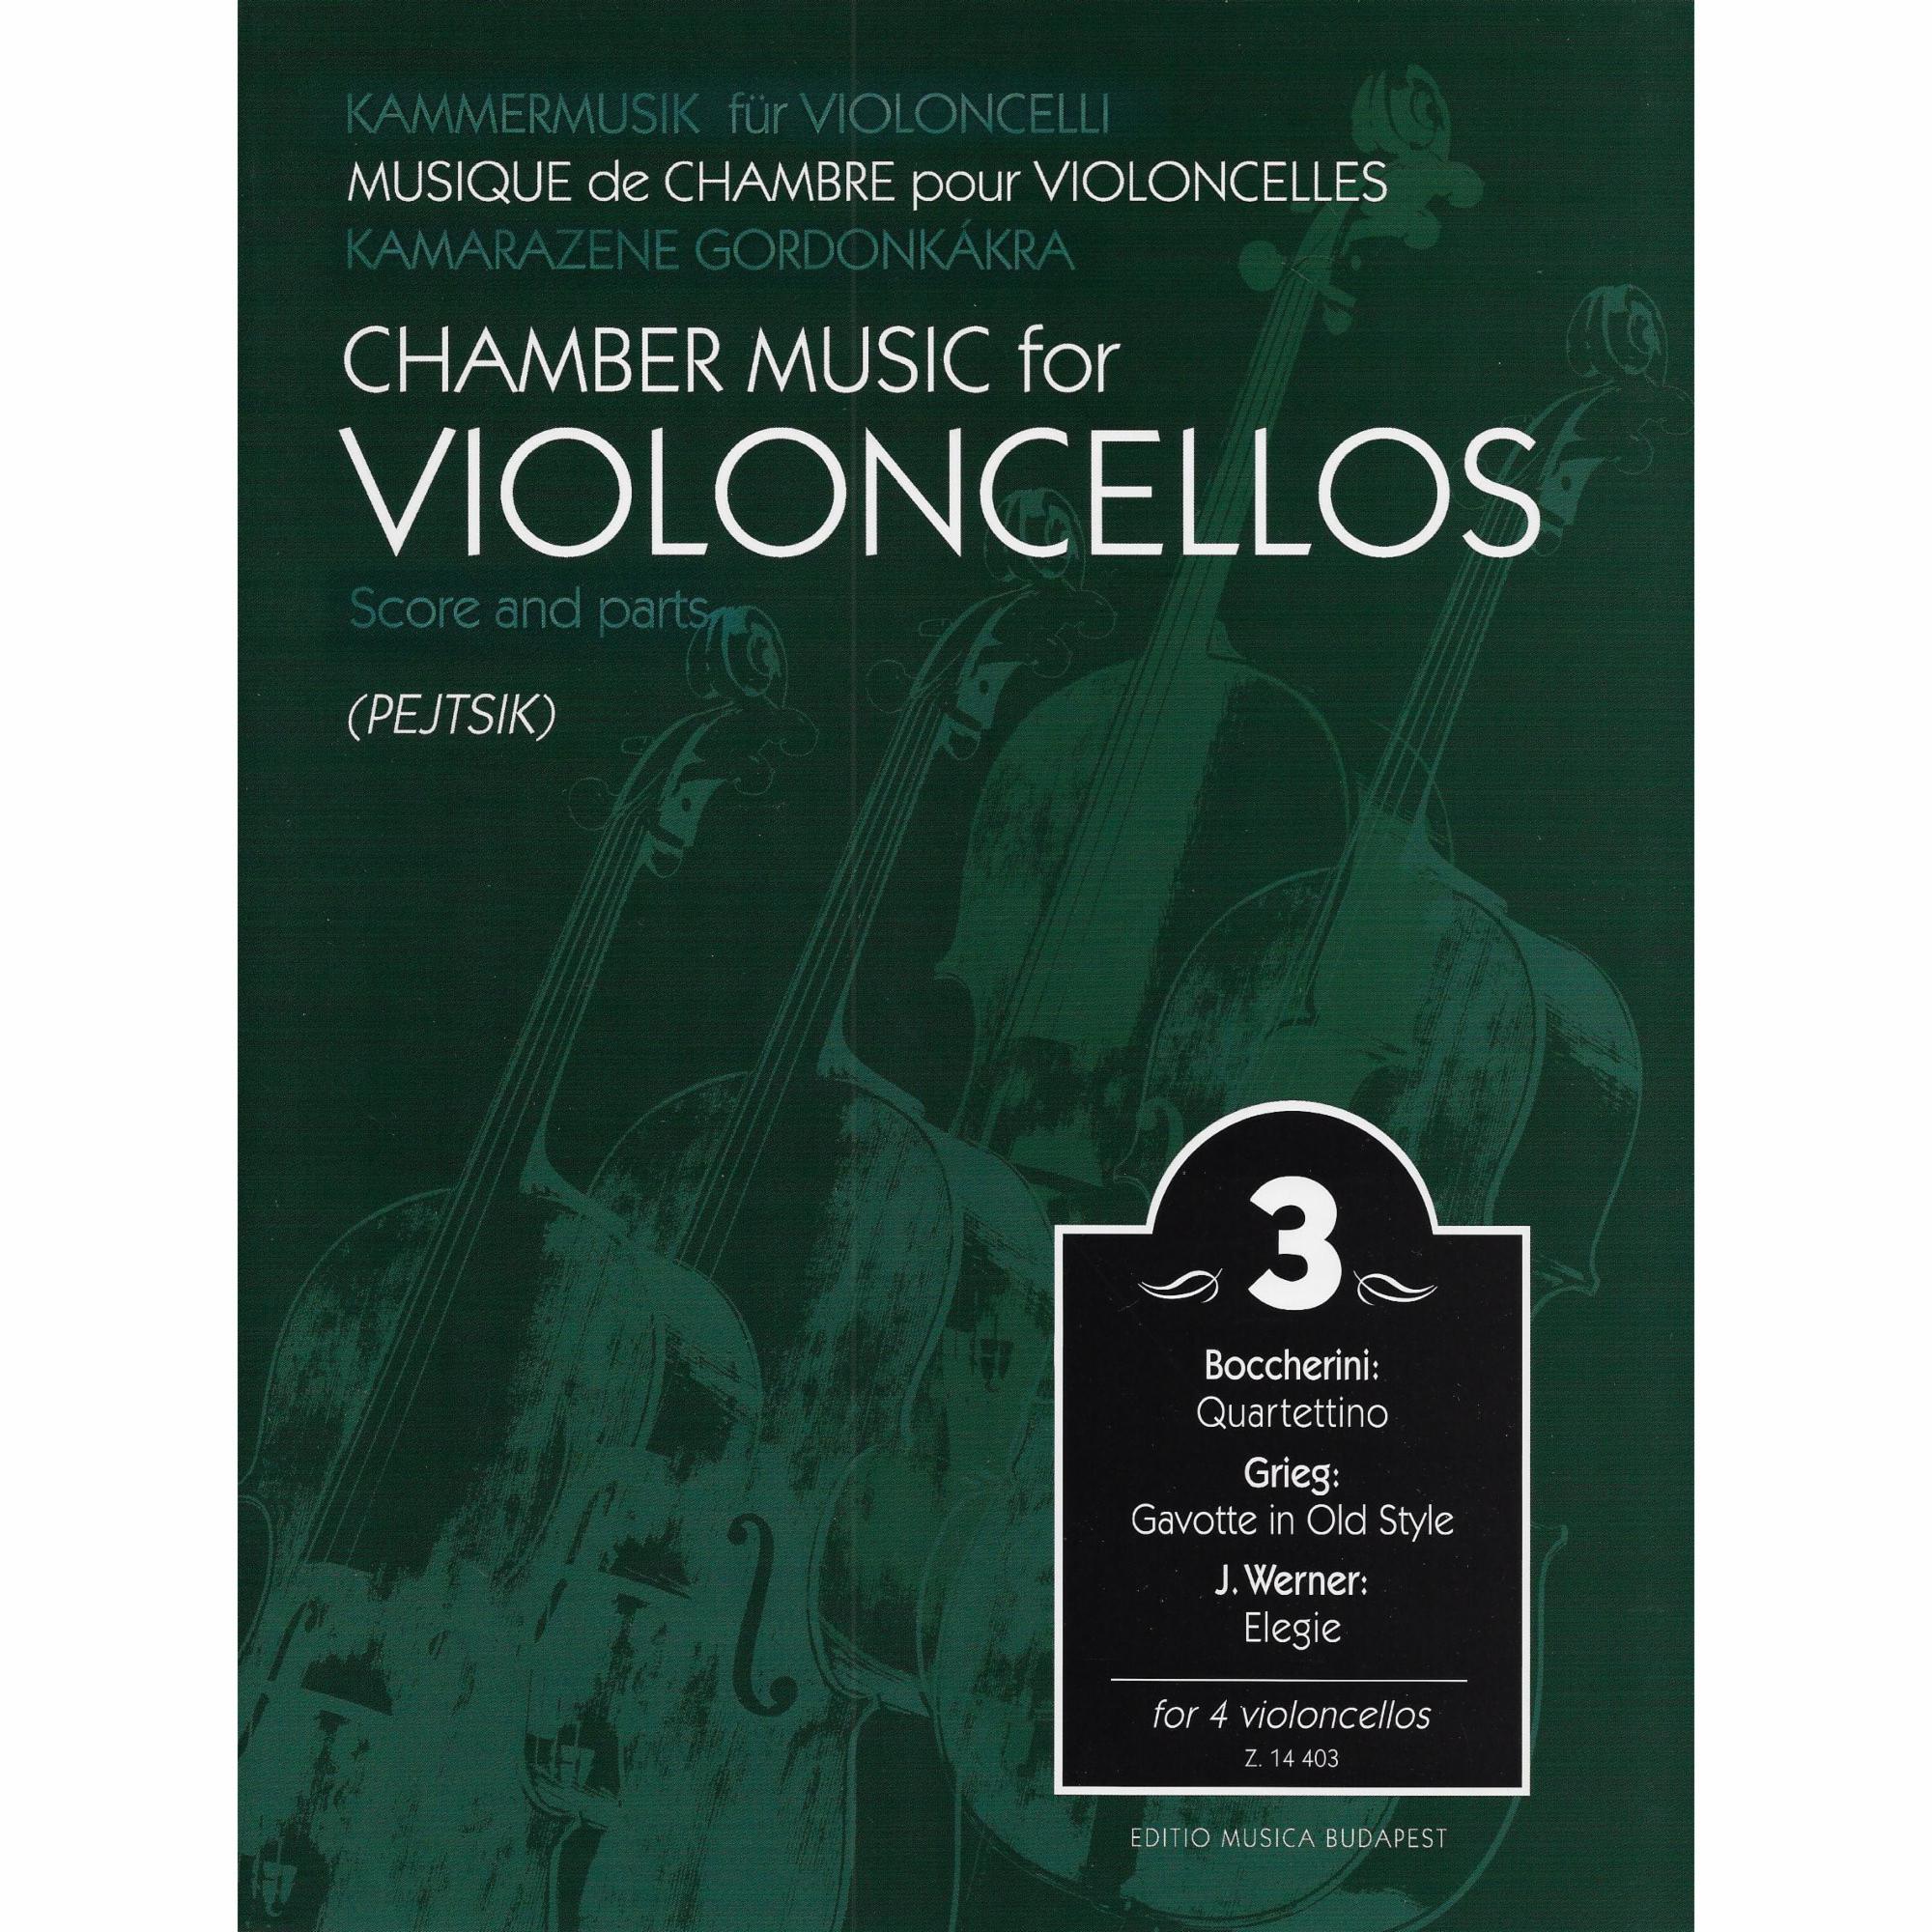 Chamber Music for Violoncellos, Volume 3